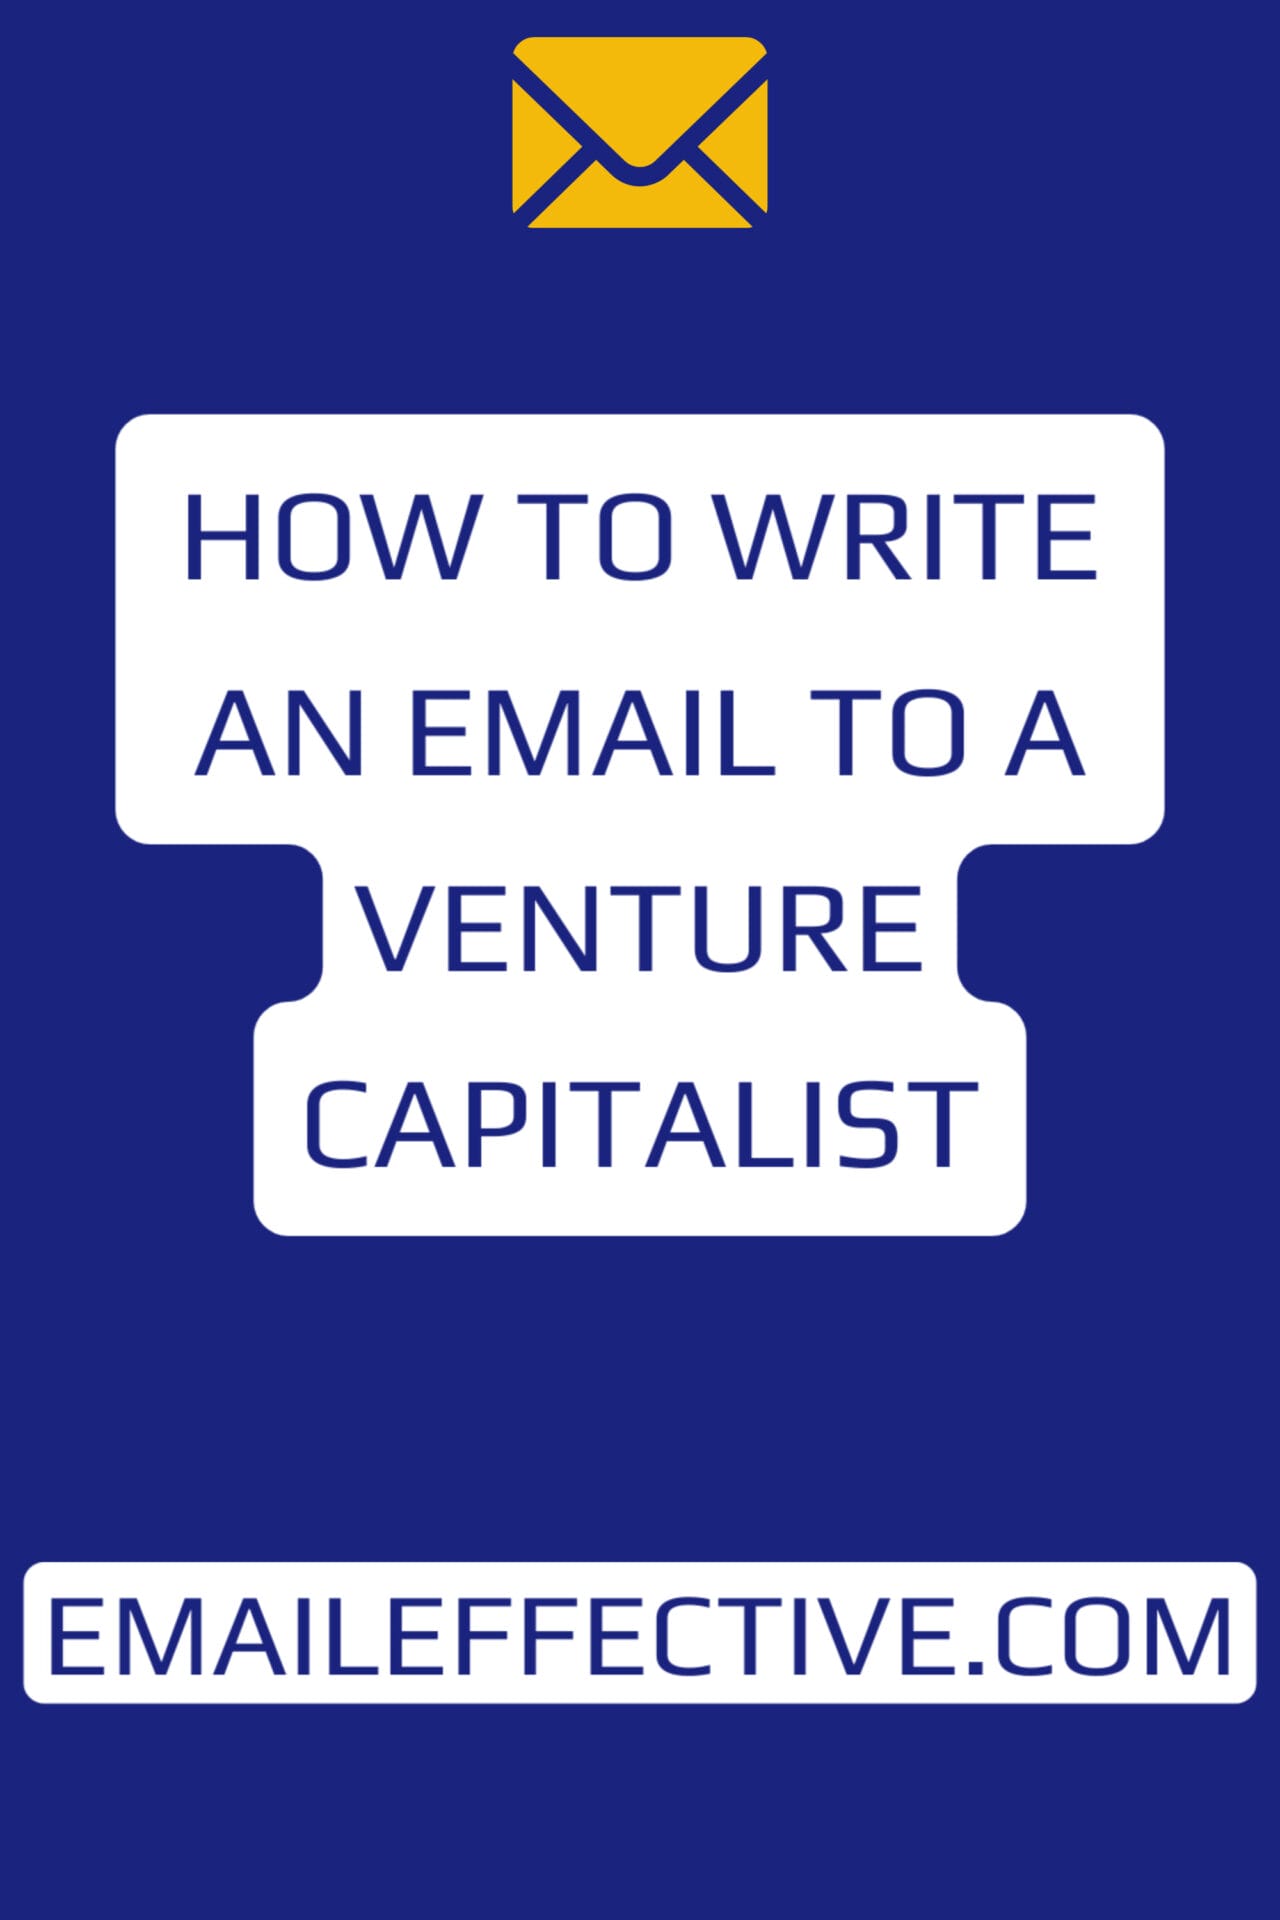 How to Write an Email to a Venture Capitalist